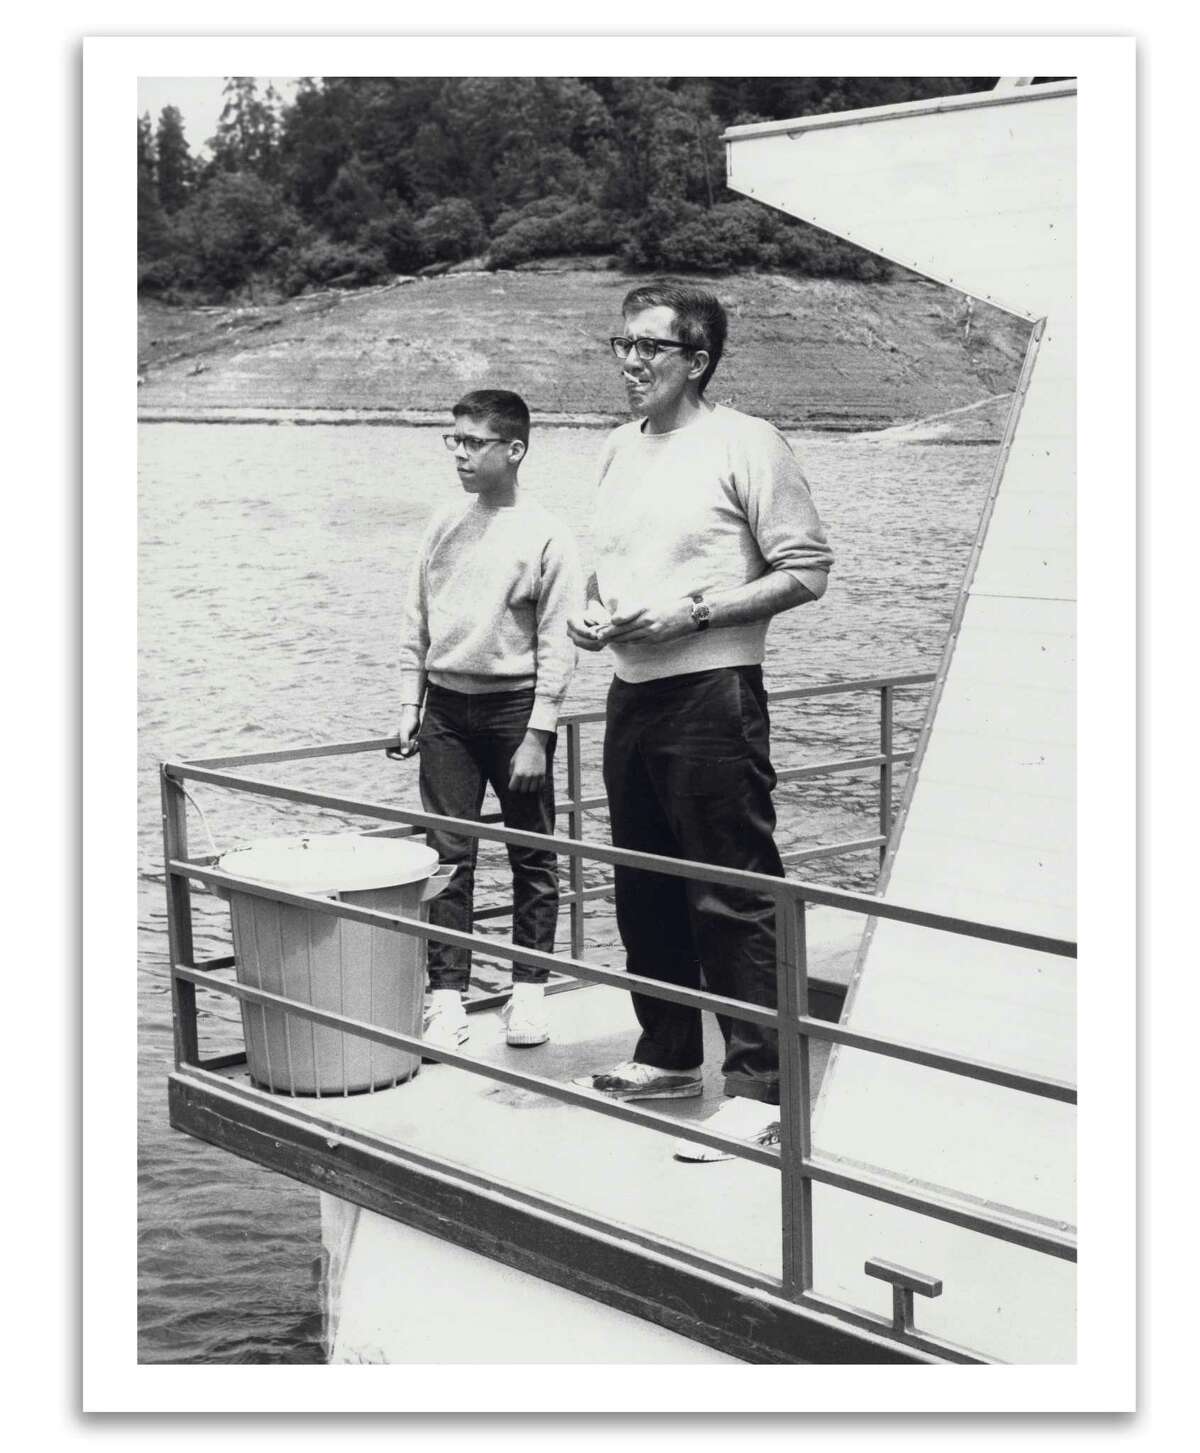 KQED host Greg Sherwood fishes with his father on Lake Shasta in the early 1960s.